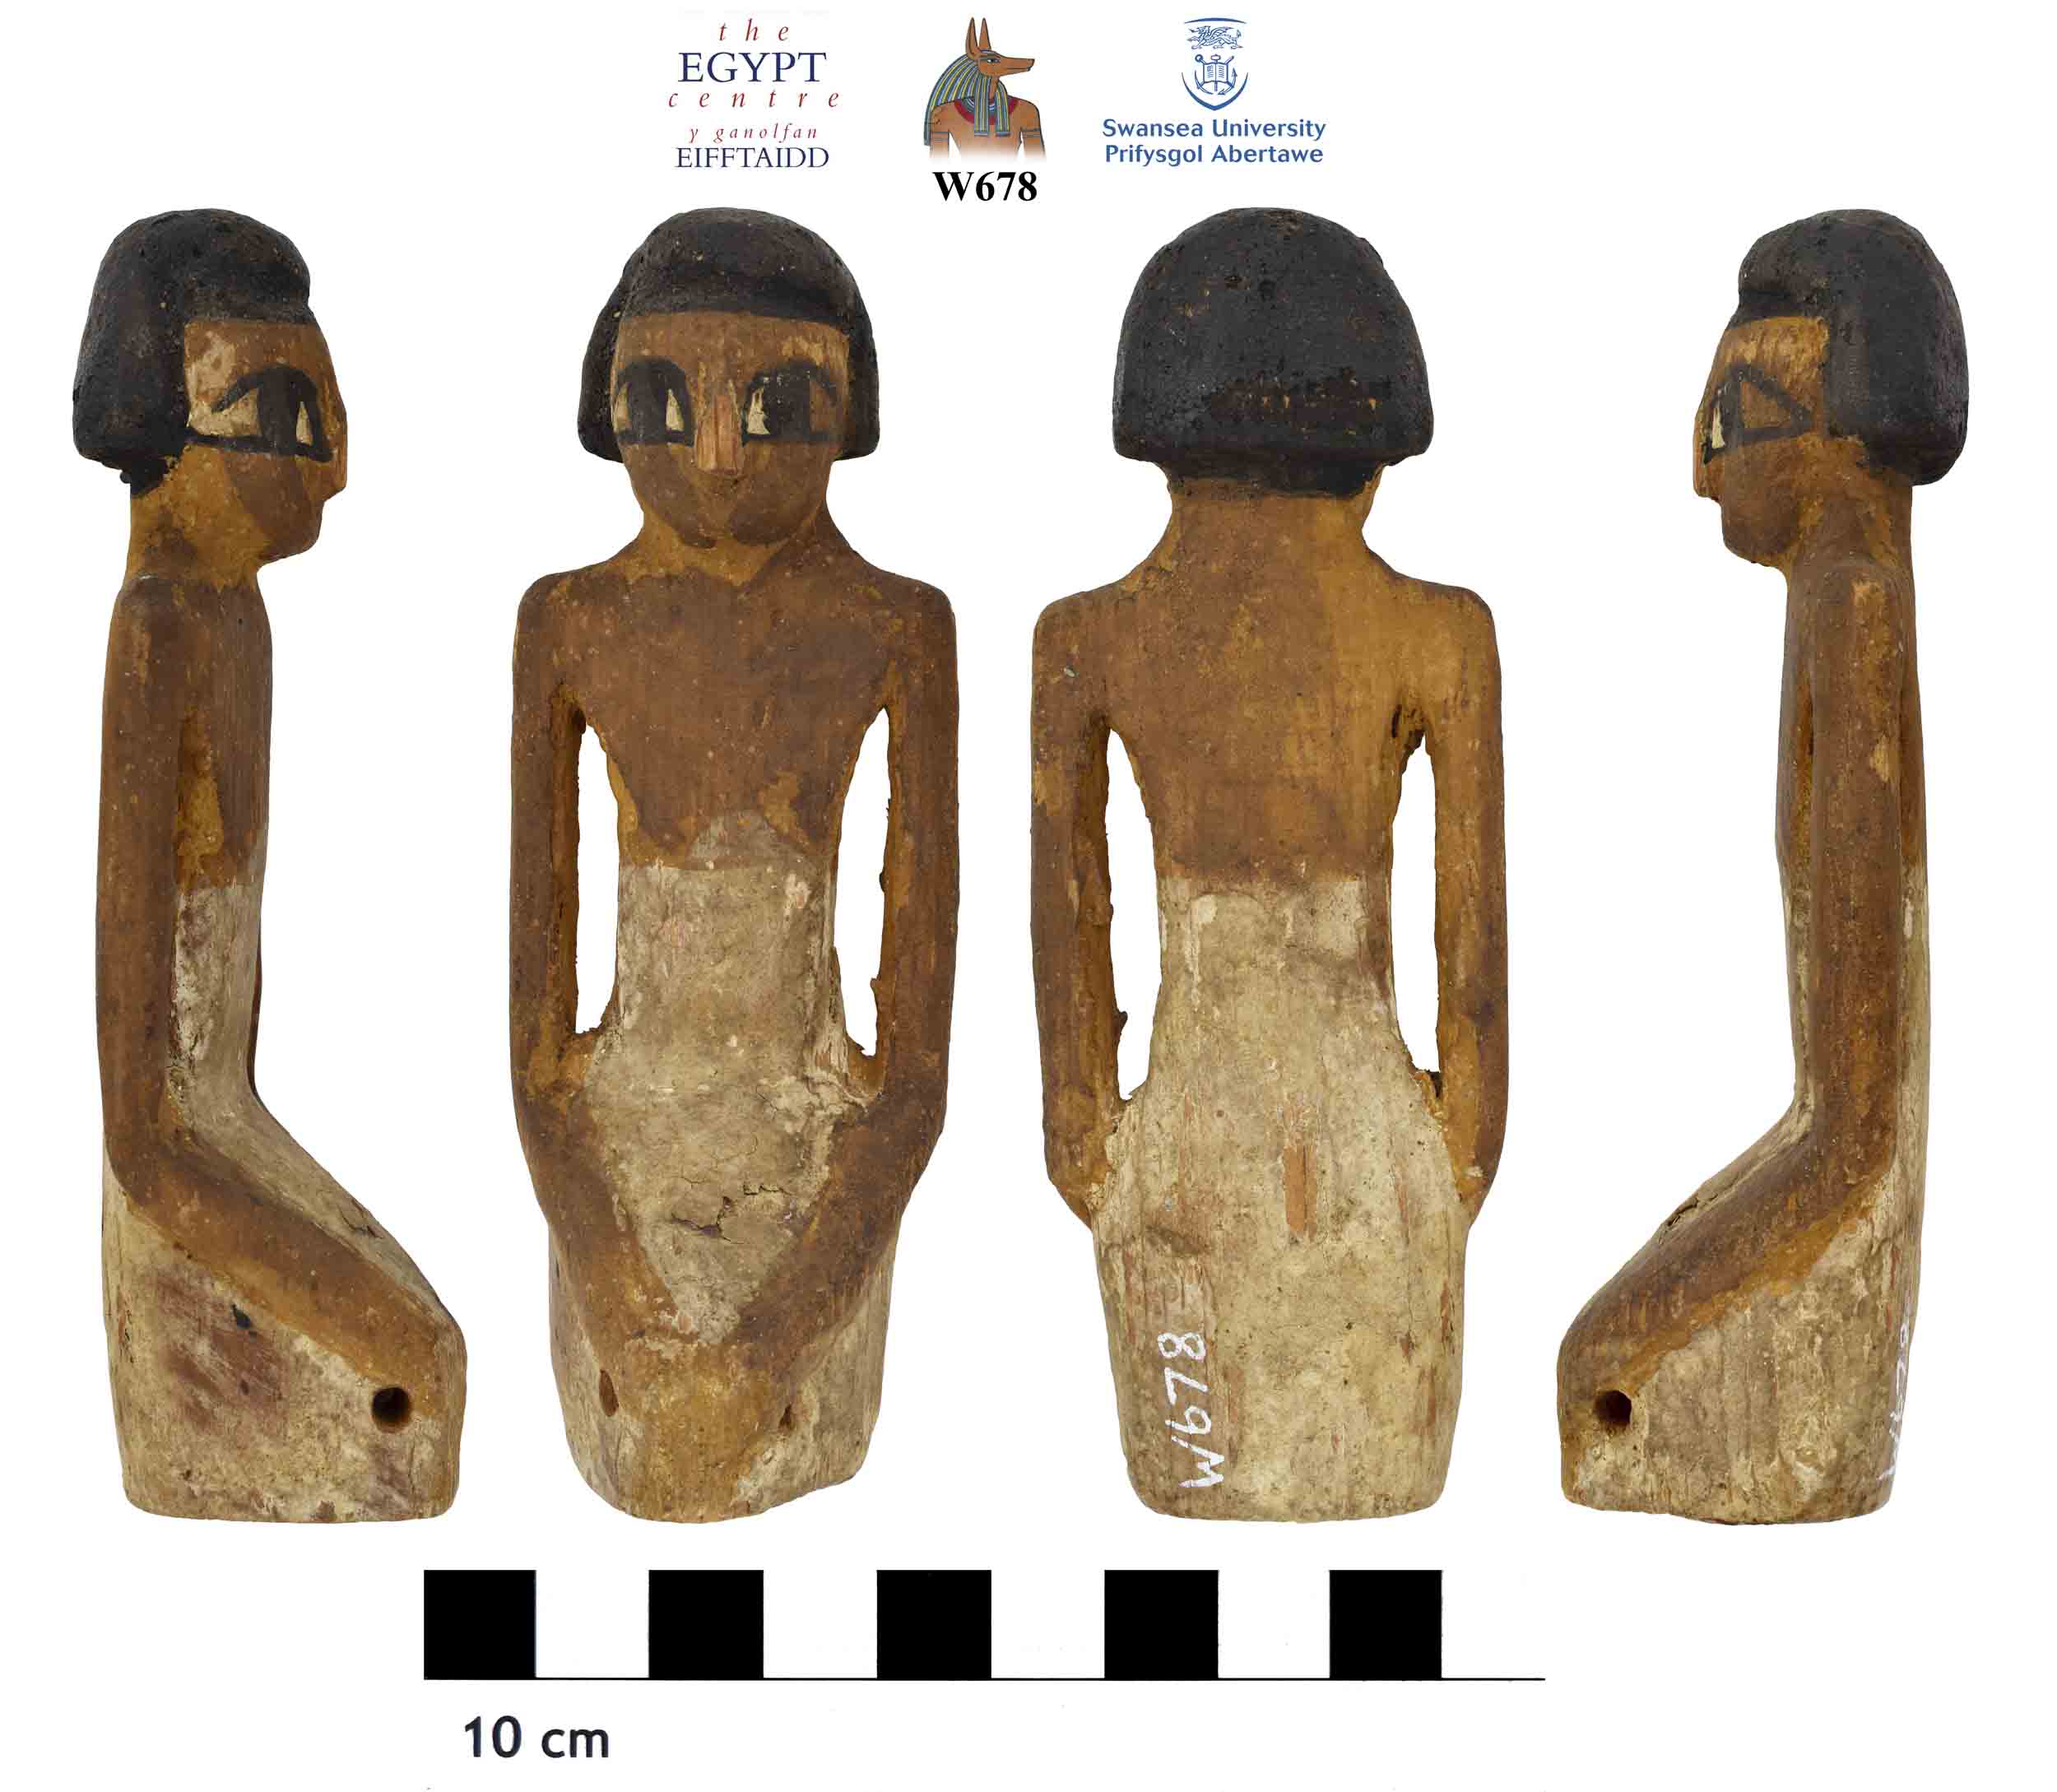 Image for: Wooden funerary figure